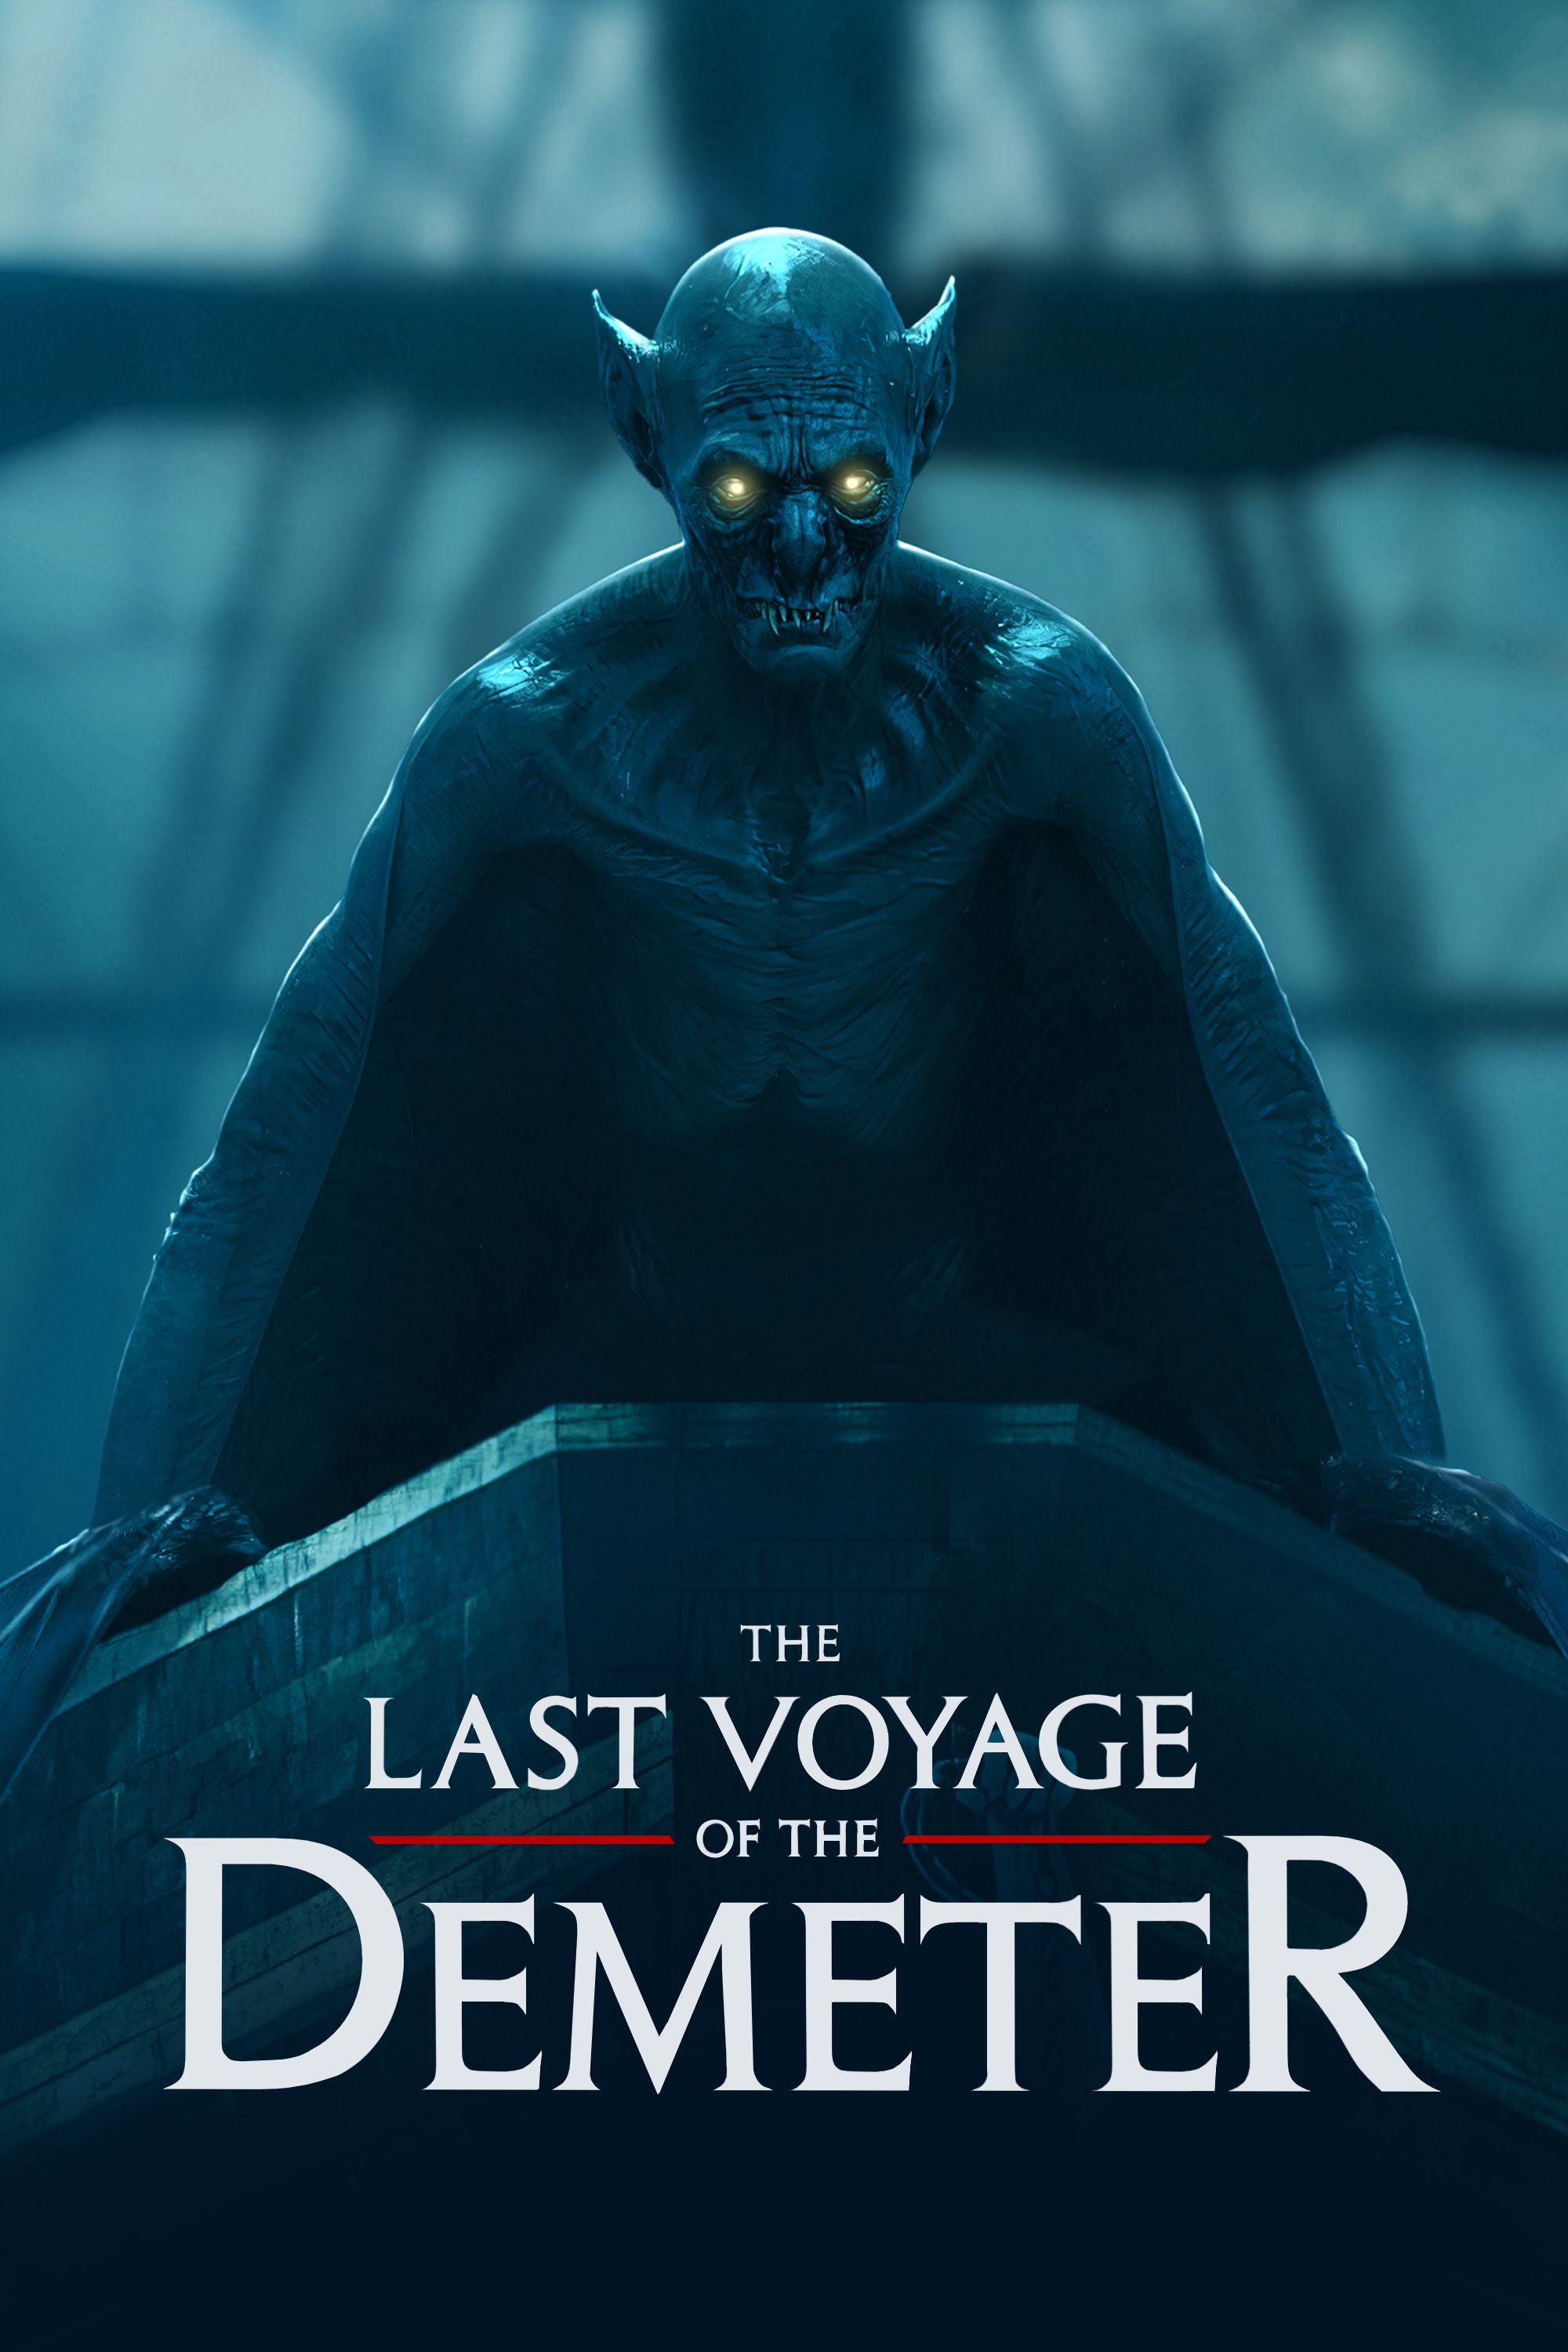 The Last Voyage of the Demeter Review: Dracula's Back